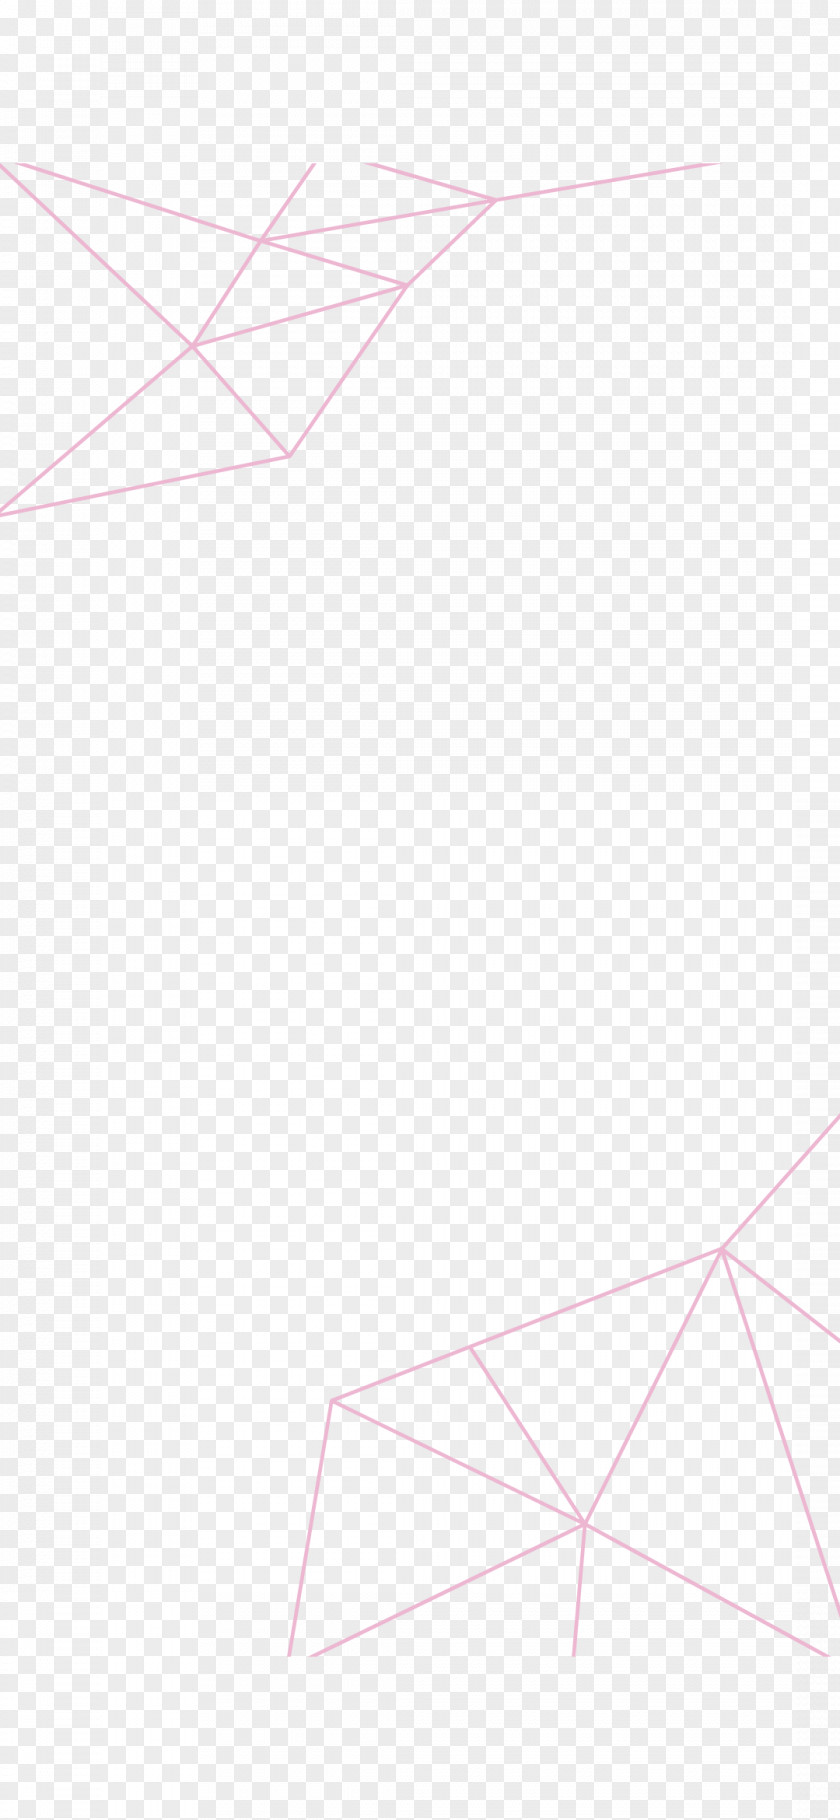 Snapchat Pink Triangle WeddingWire Image PNG